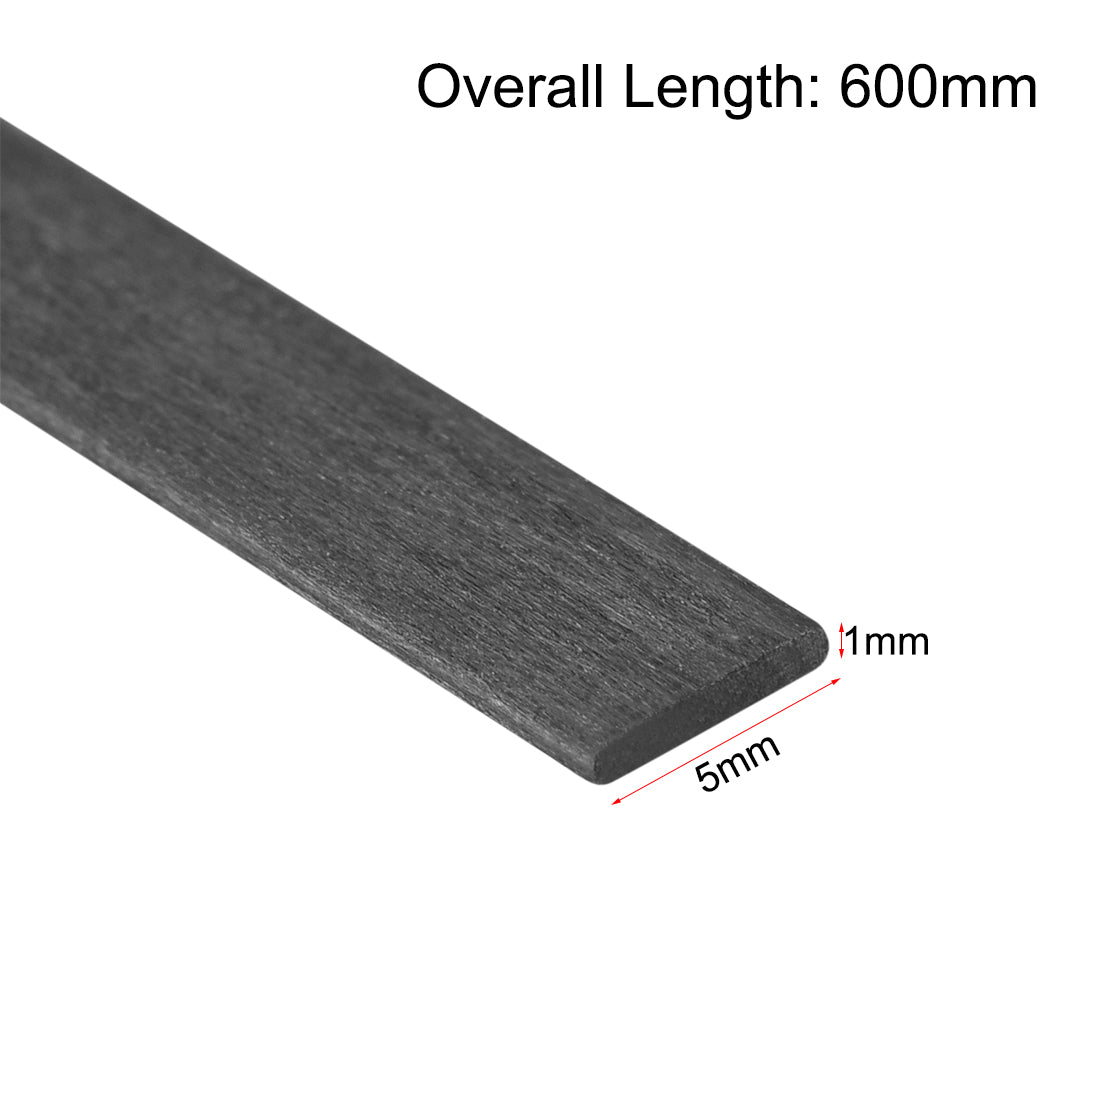 uxcell Uxcell Carbon Fiber Strip Bars 1x5mm 600mm Length Pultruded Carbon Fiber Strips for Kites, RC Airplane 2 Pcs